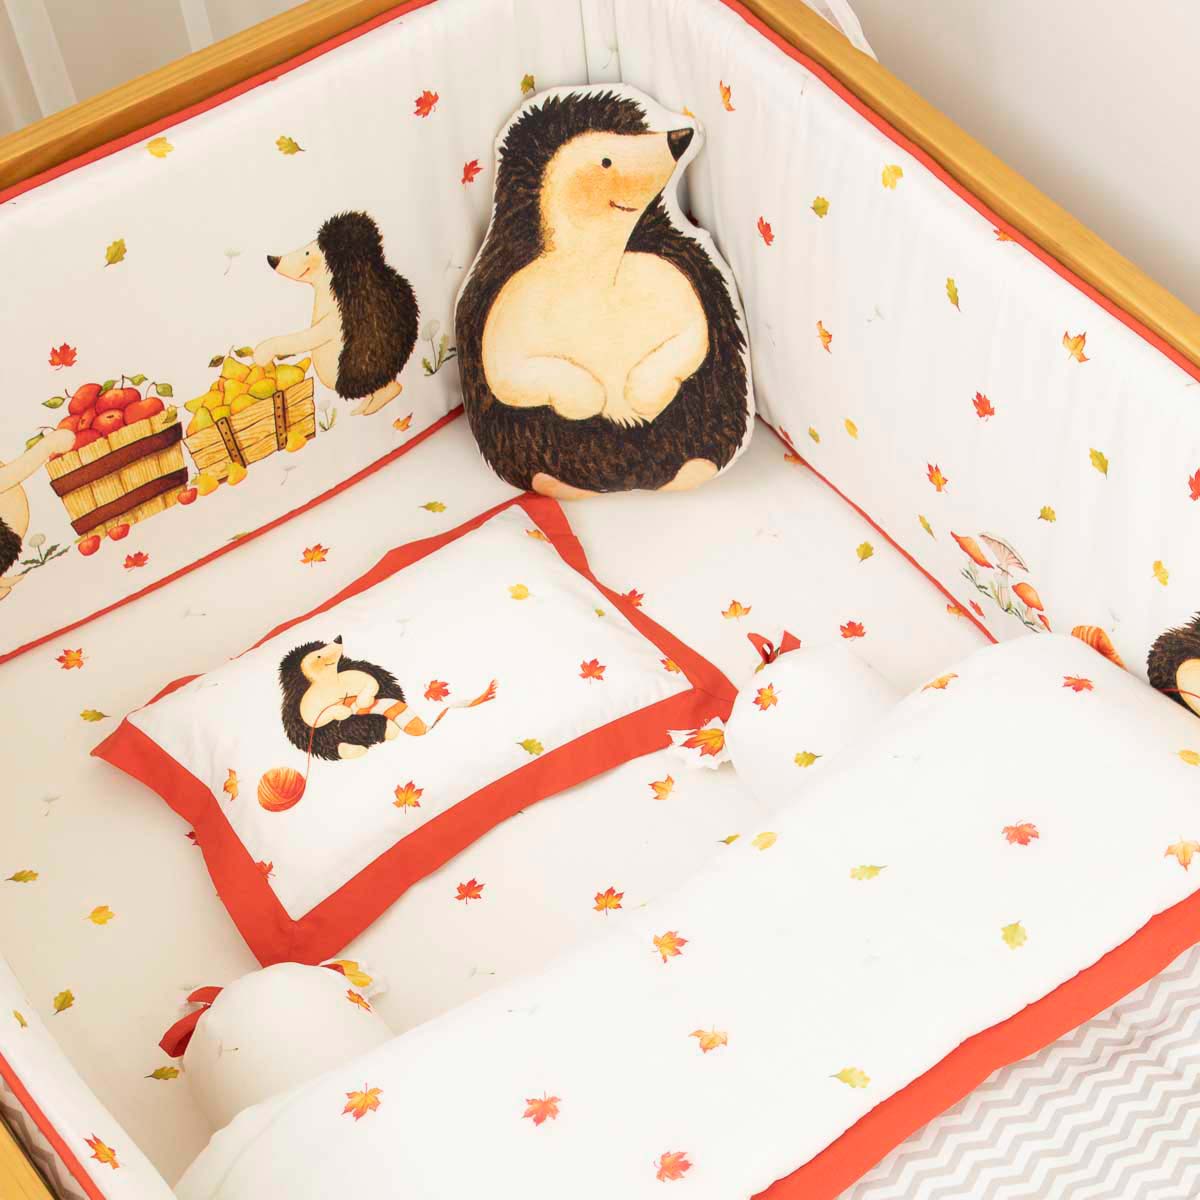 Hoggy the Hedgehog - Cot Bedding Set with Bumper - Momma Hoggy